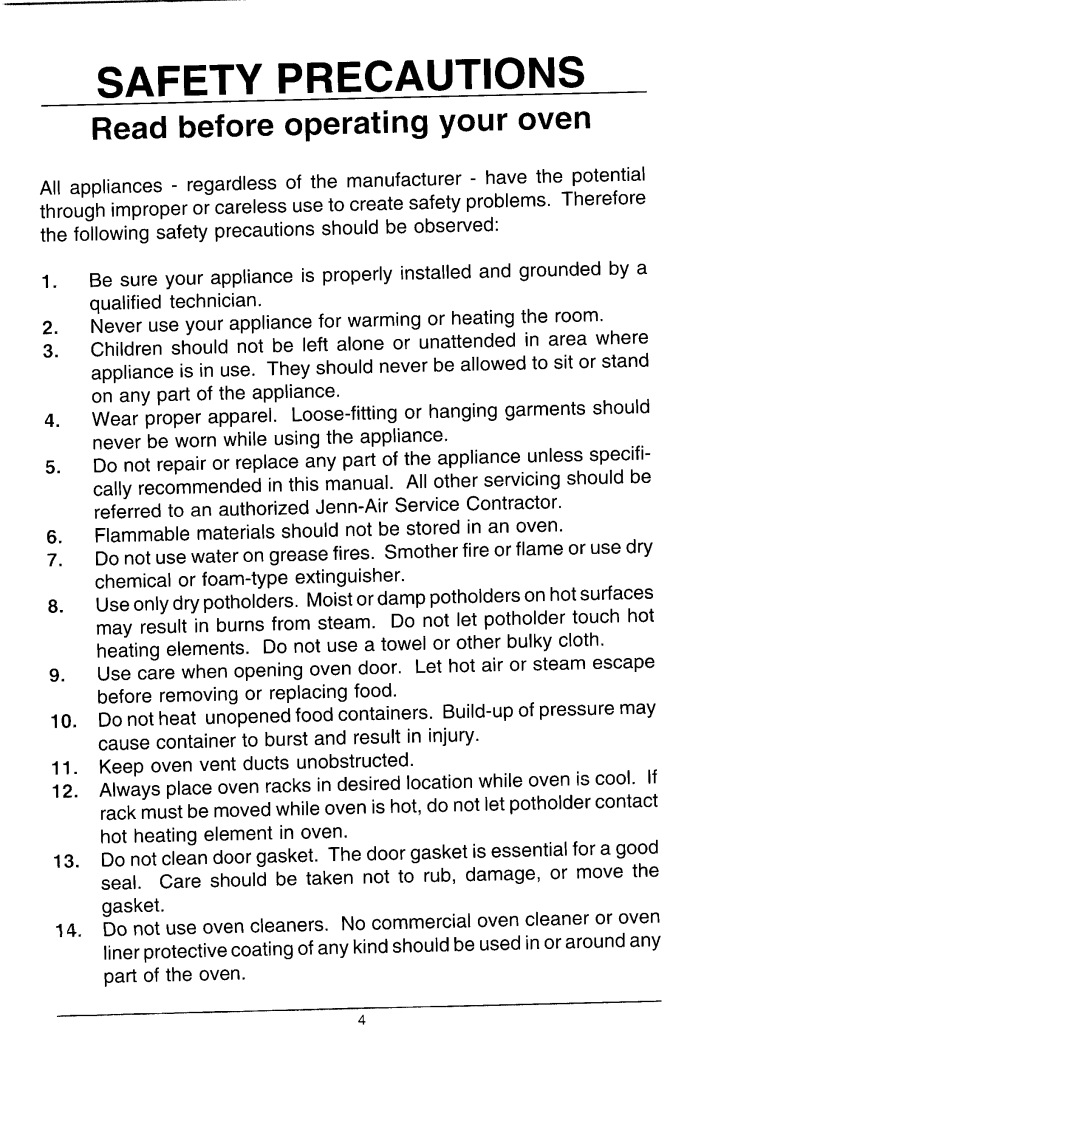 Jenn-Air W131 manual Safety Precautions, Read before operating your oven 